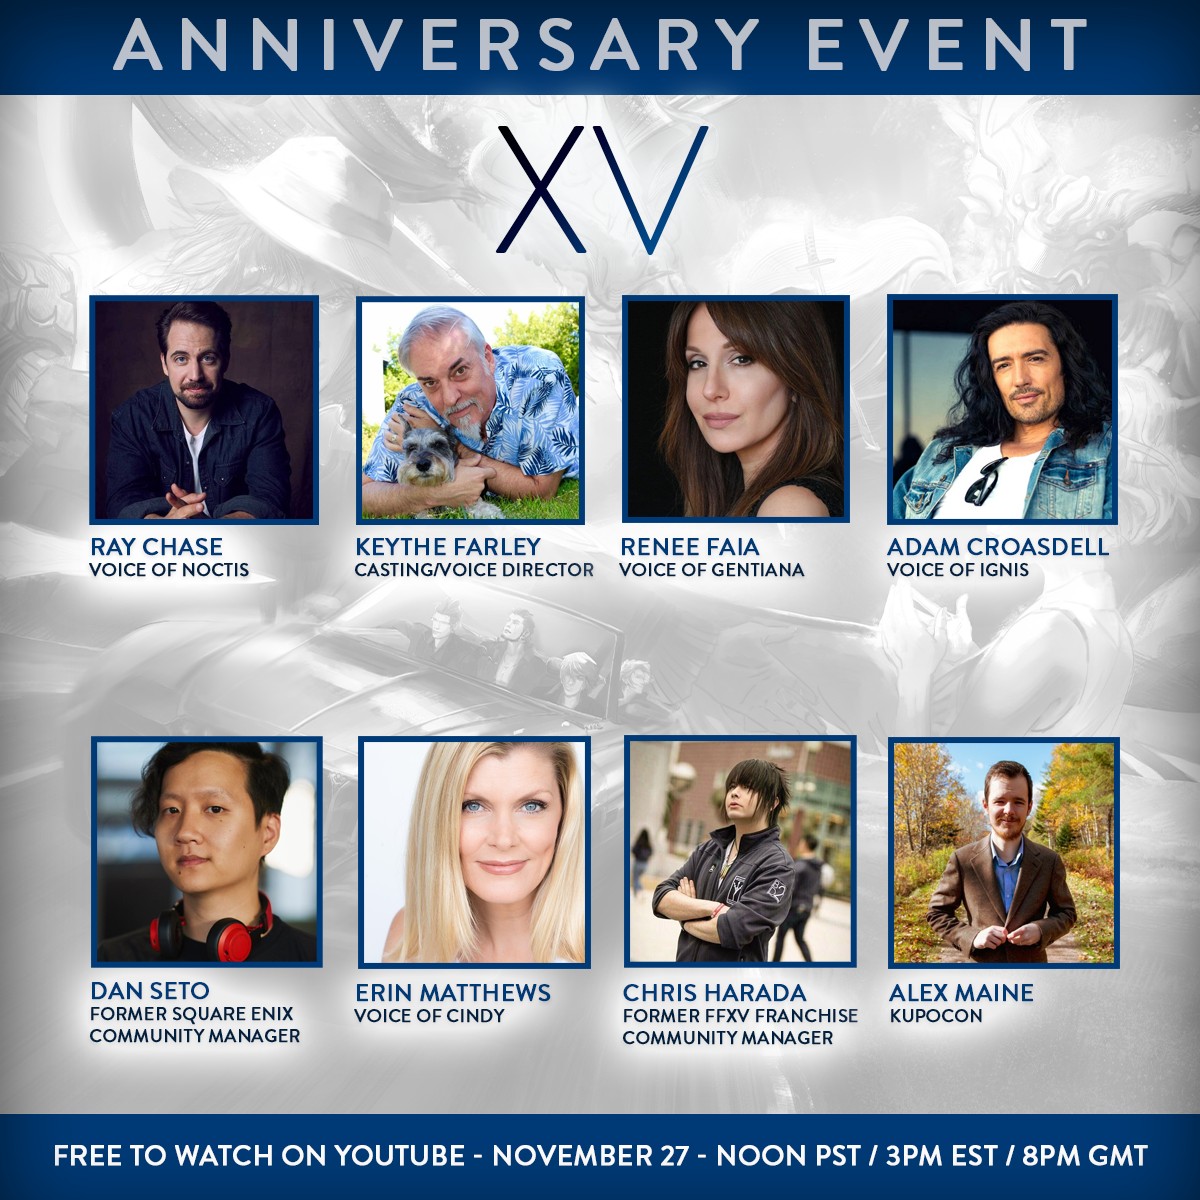 Just a few days to go until our special #FFXV anniversary event. Join us for the free stream on Nov 27: youtube.com/watch?v=Hs9lNS… @RayChase @faronear @reneefaia @ACroasdell @dmseto @HaradaCH @AlexMaine